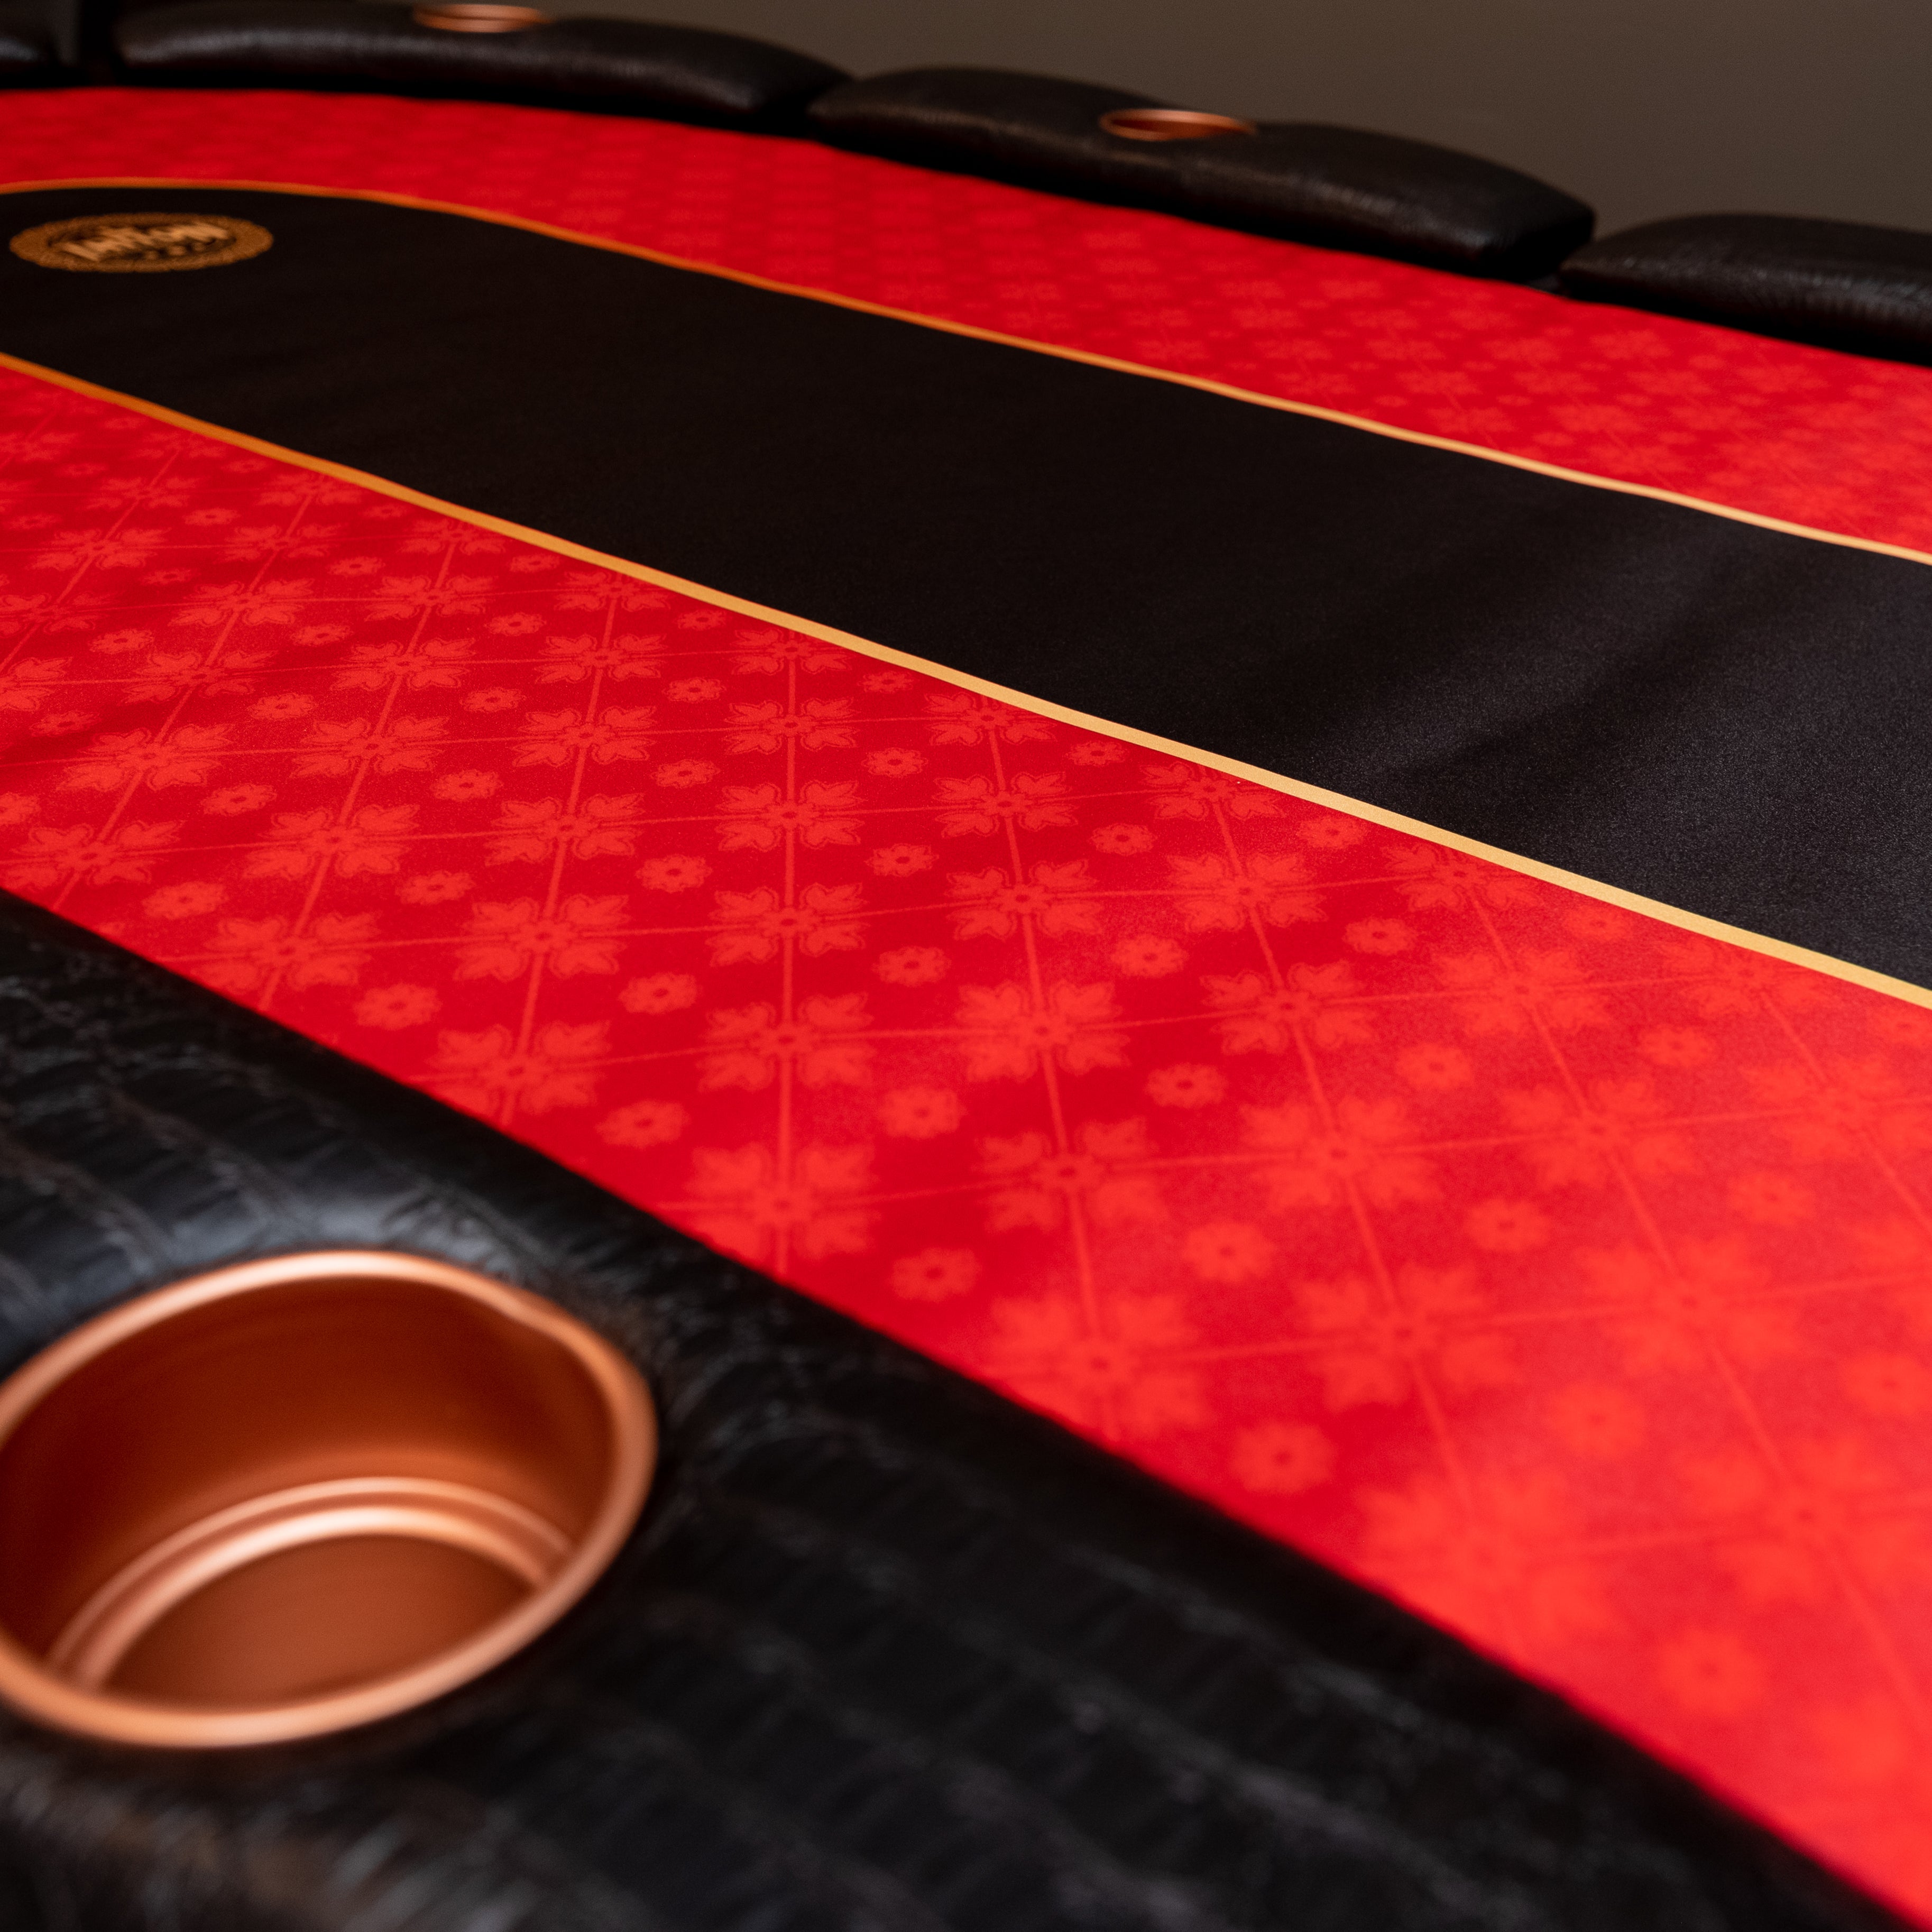 Triton Portable Poker Mat with Carry Case